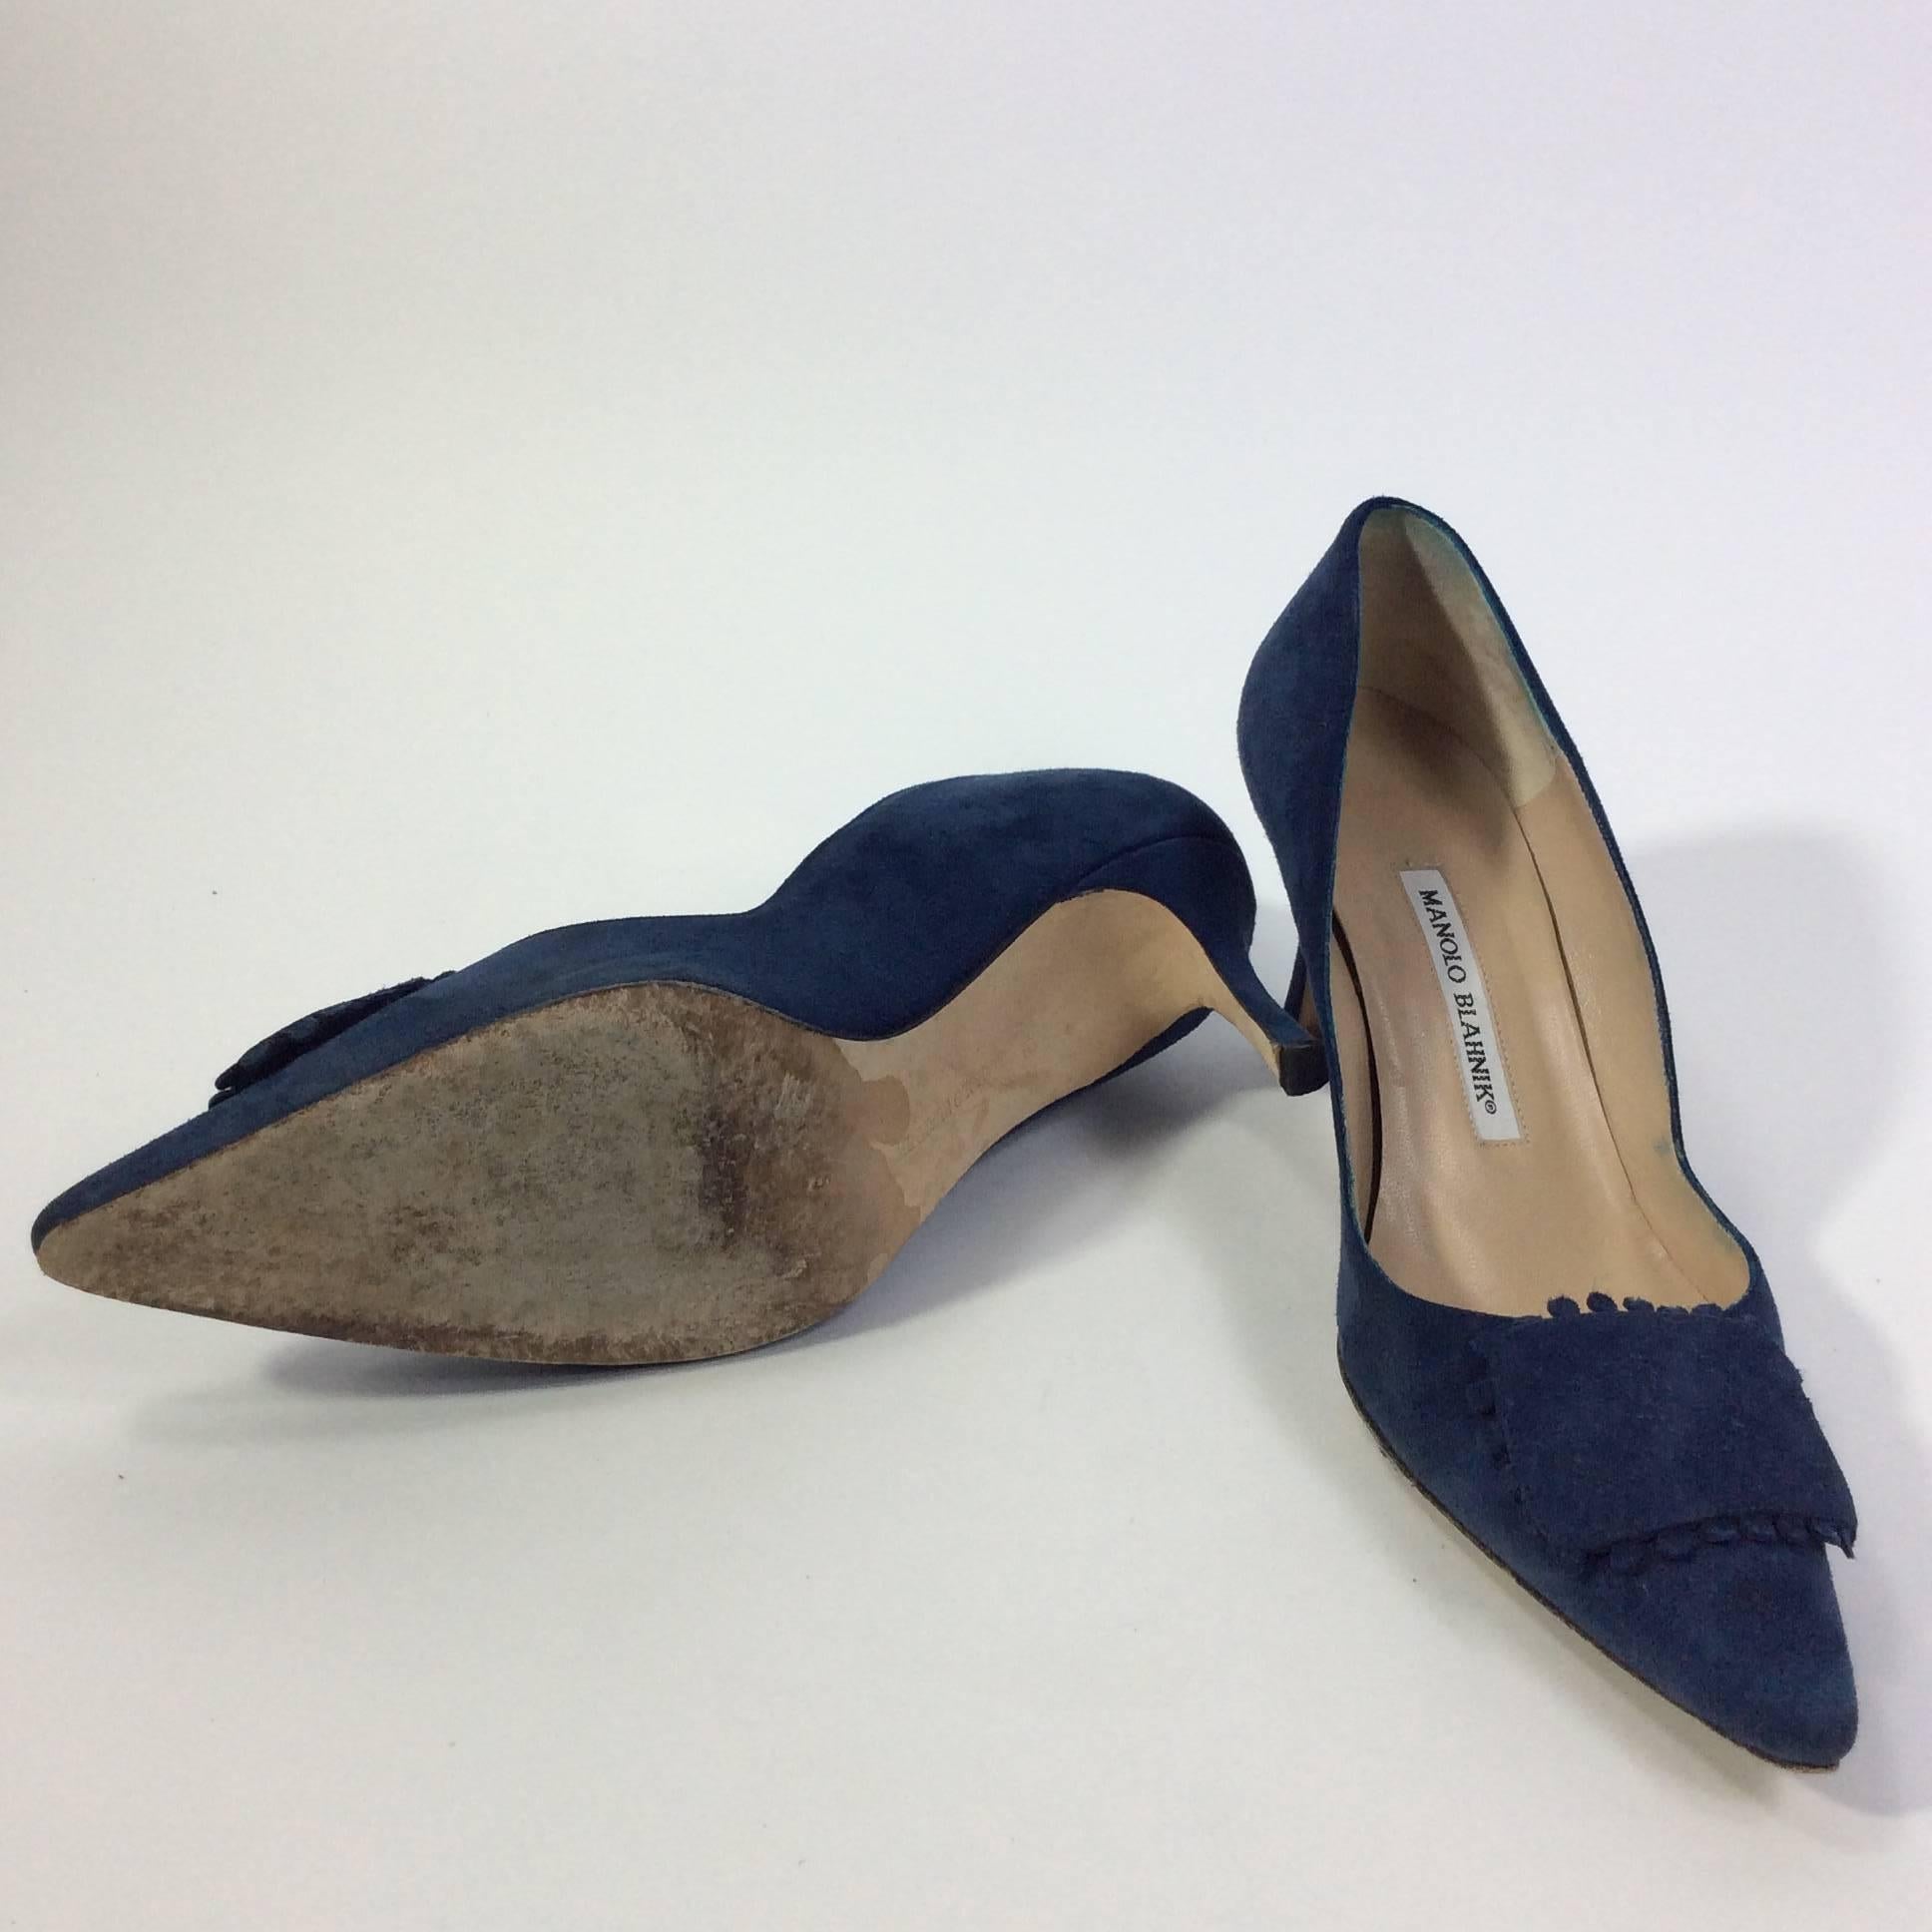 Manolo Blahnik Blue Suede Pointed Toe Pumps In Excellent Condition For Sale In Narberth, PA